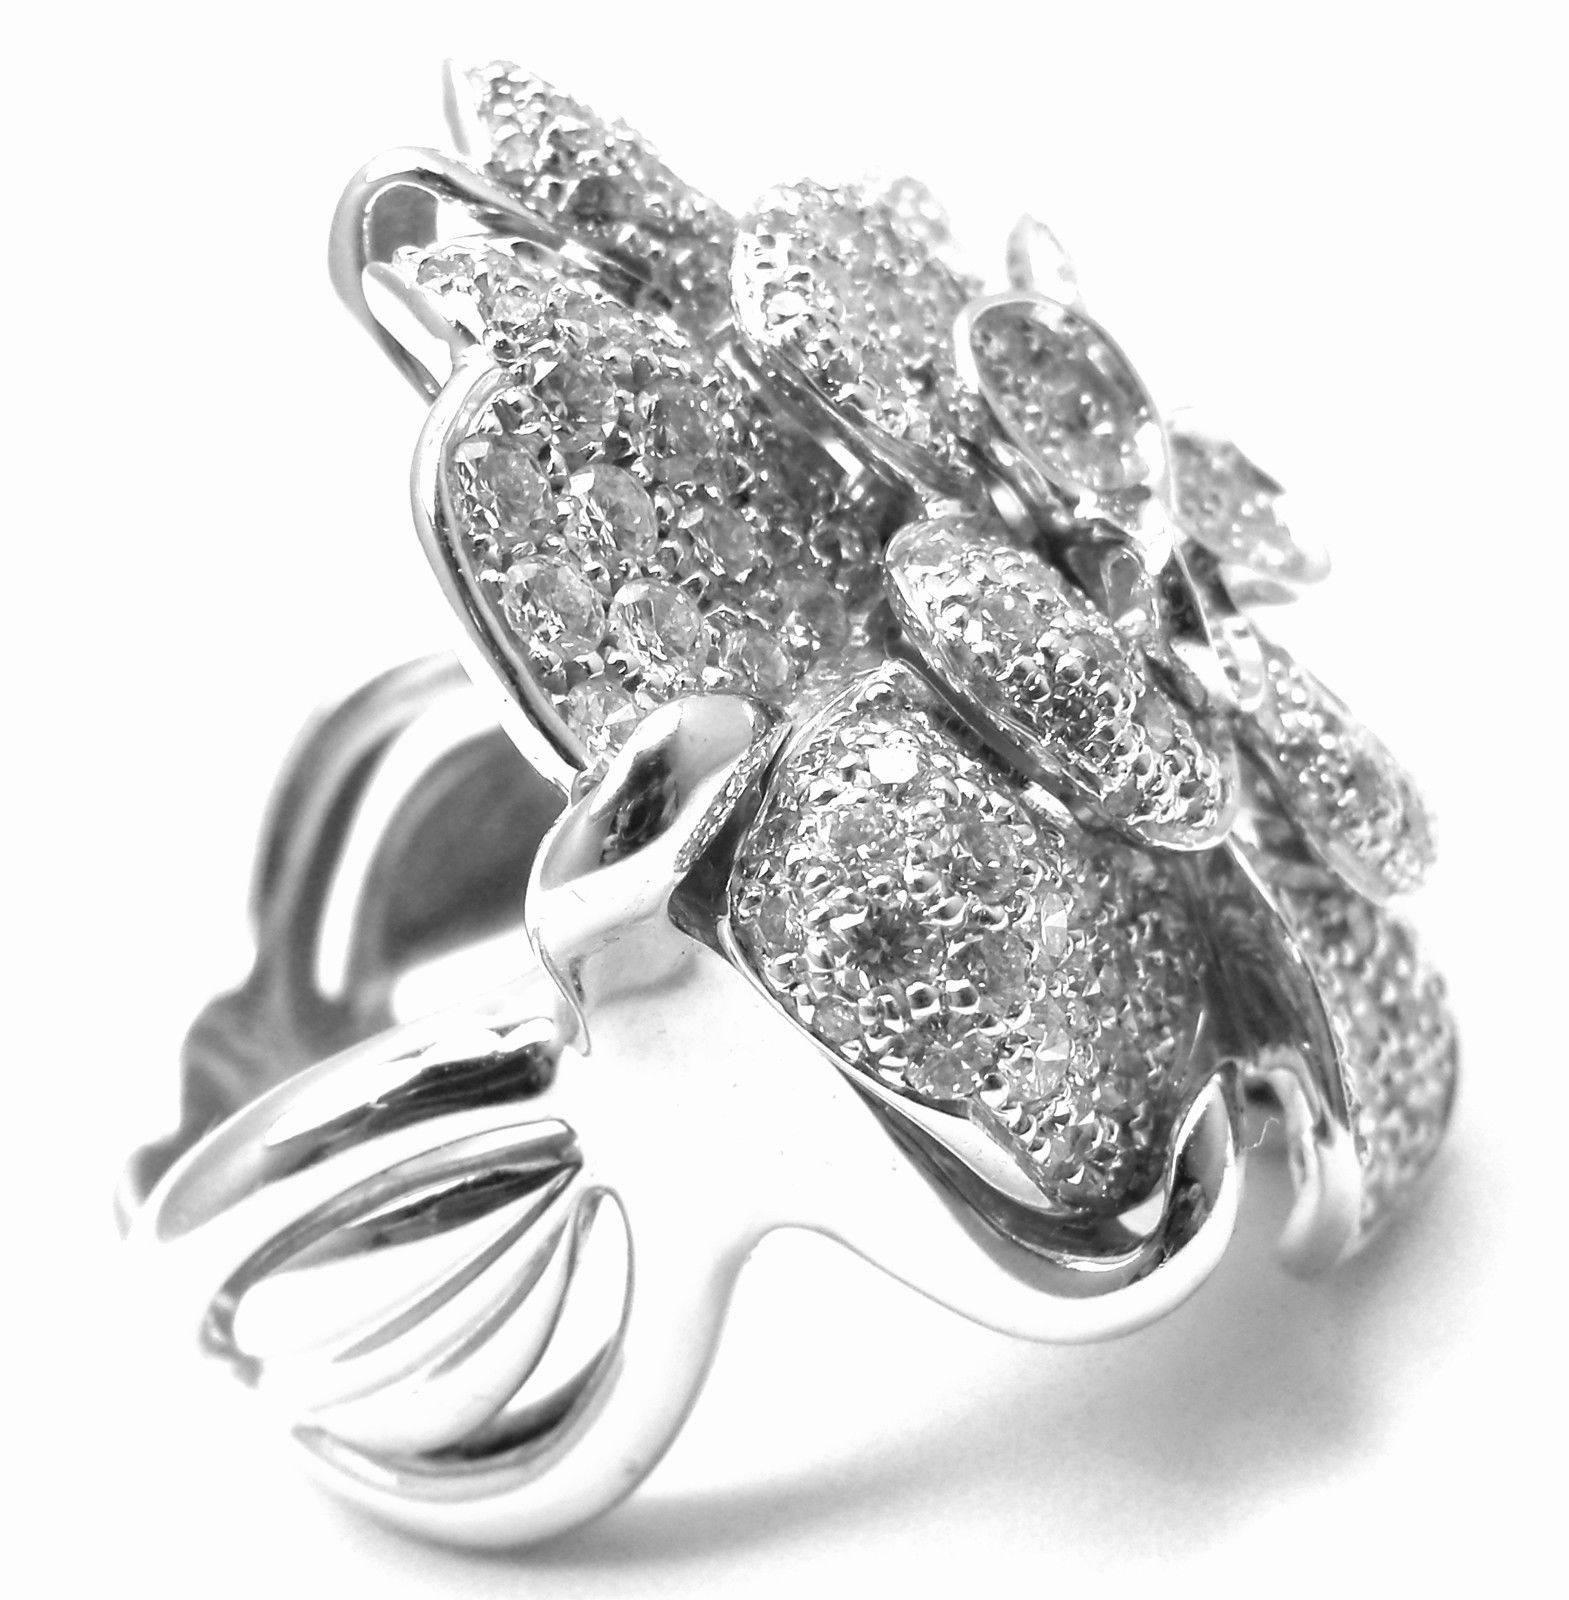 18k White Gold Diamond Large Camelia Flower Ring by Chanel. From the Chanel 